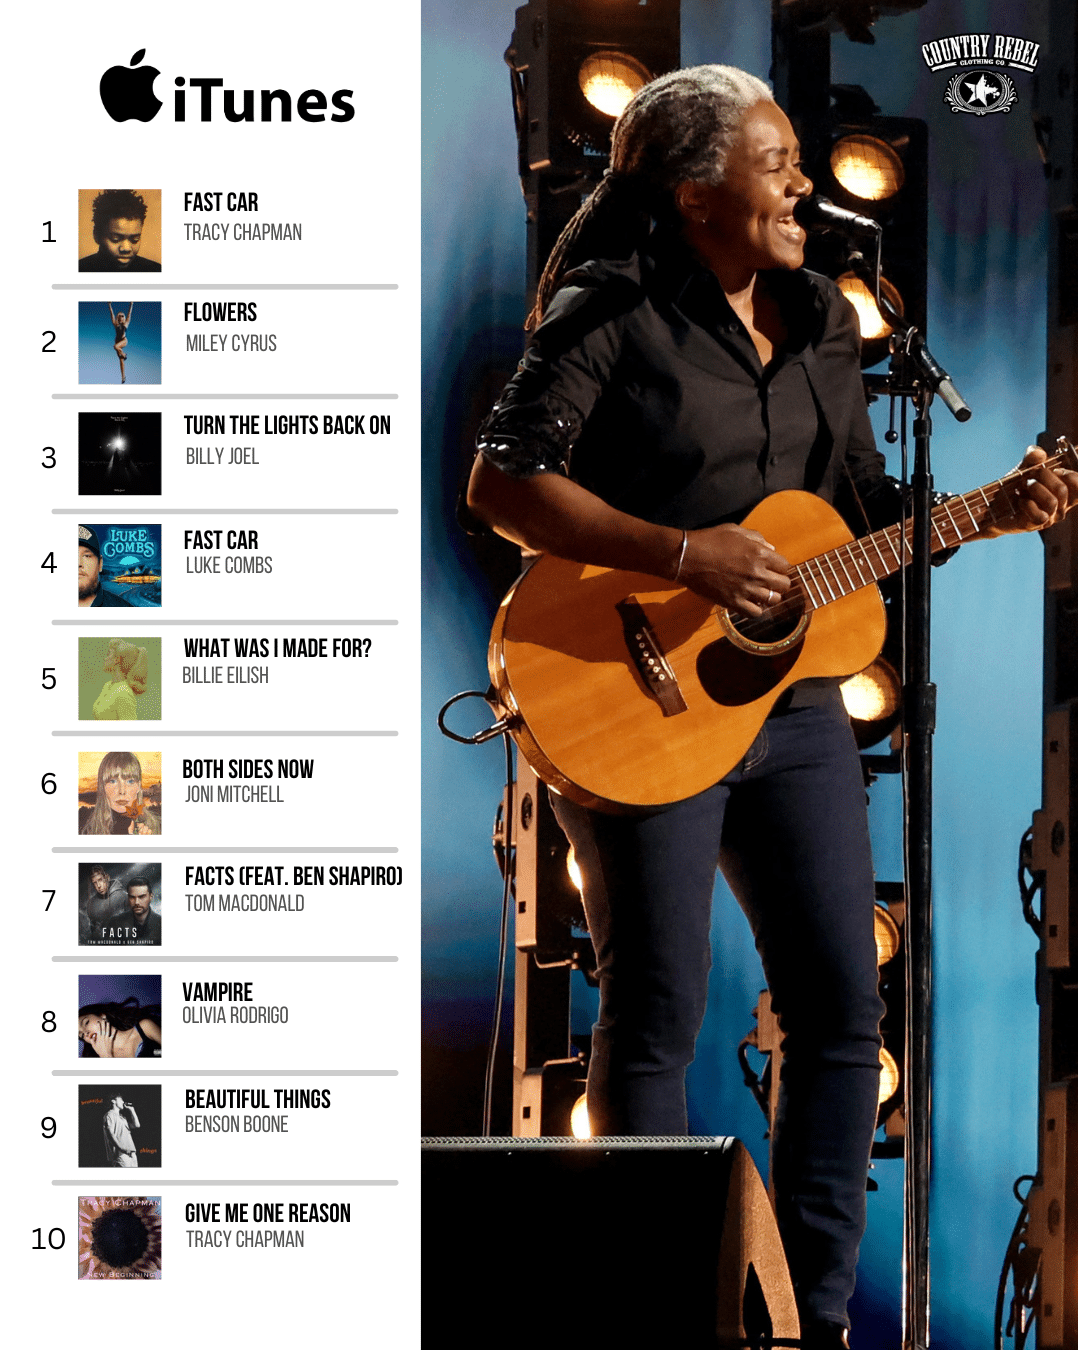 Tracy Chapman's "Fast Car" on the top of the iTunes chart.